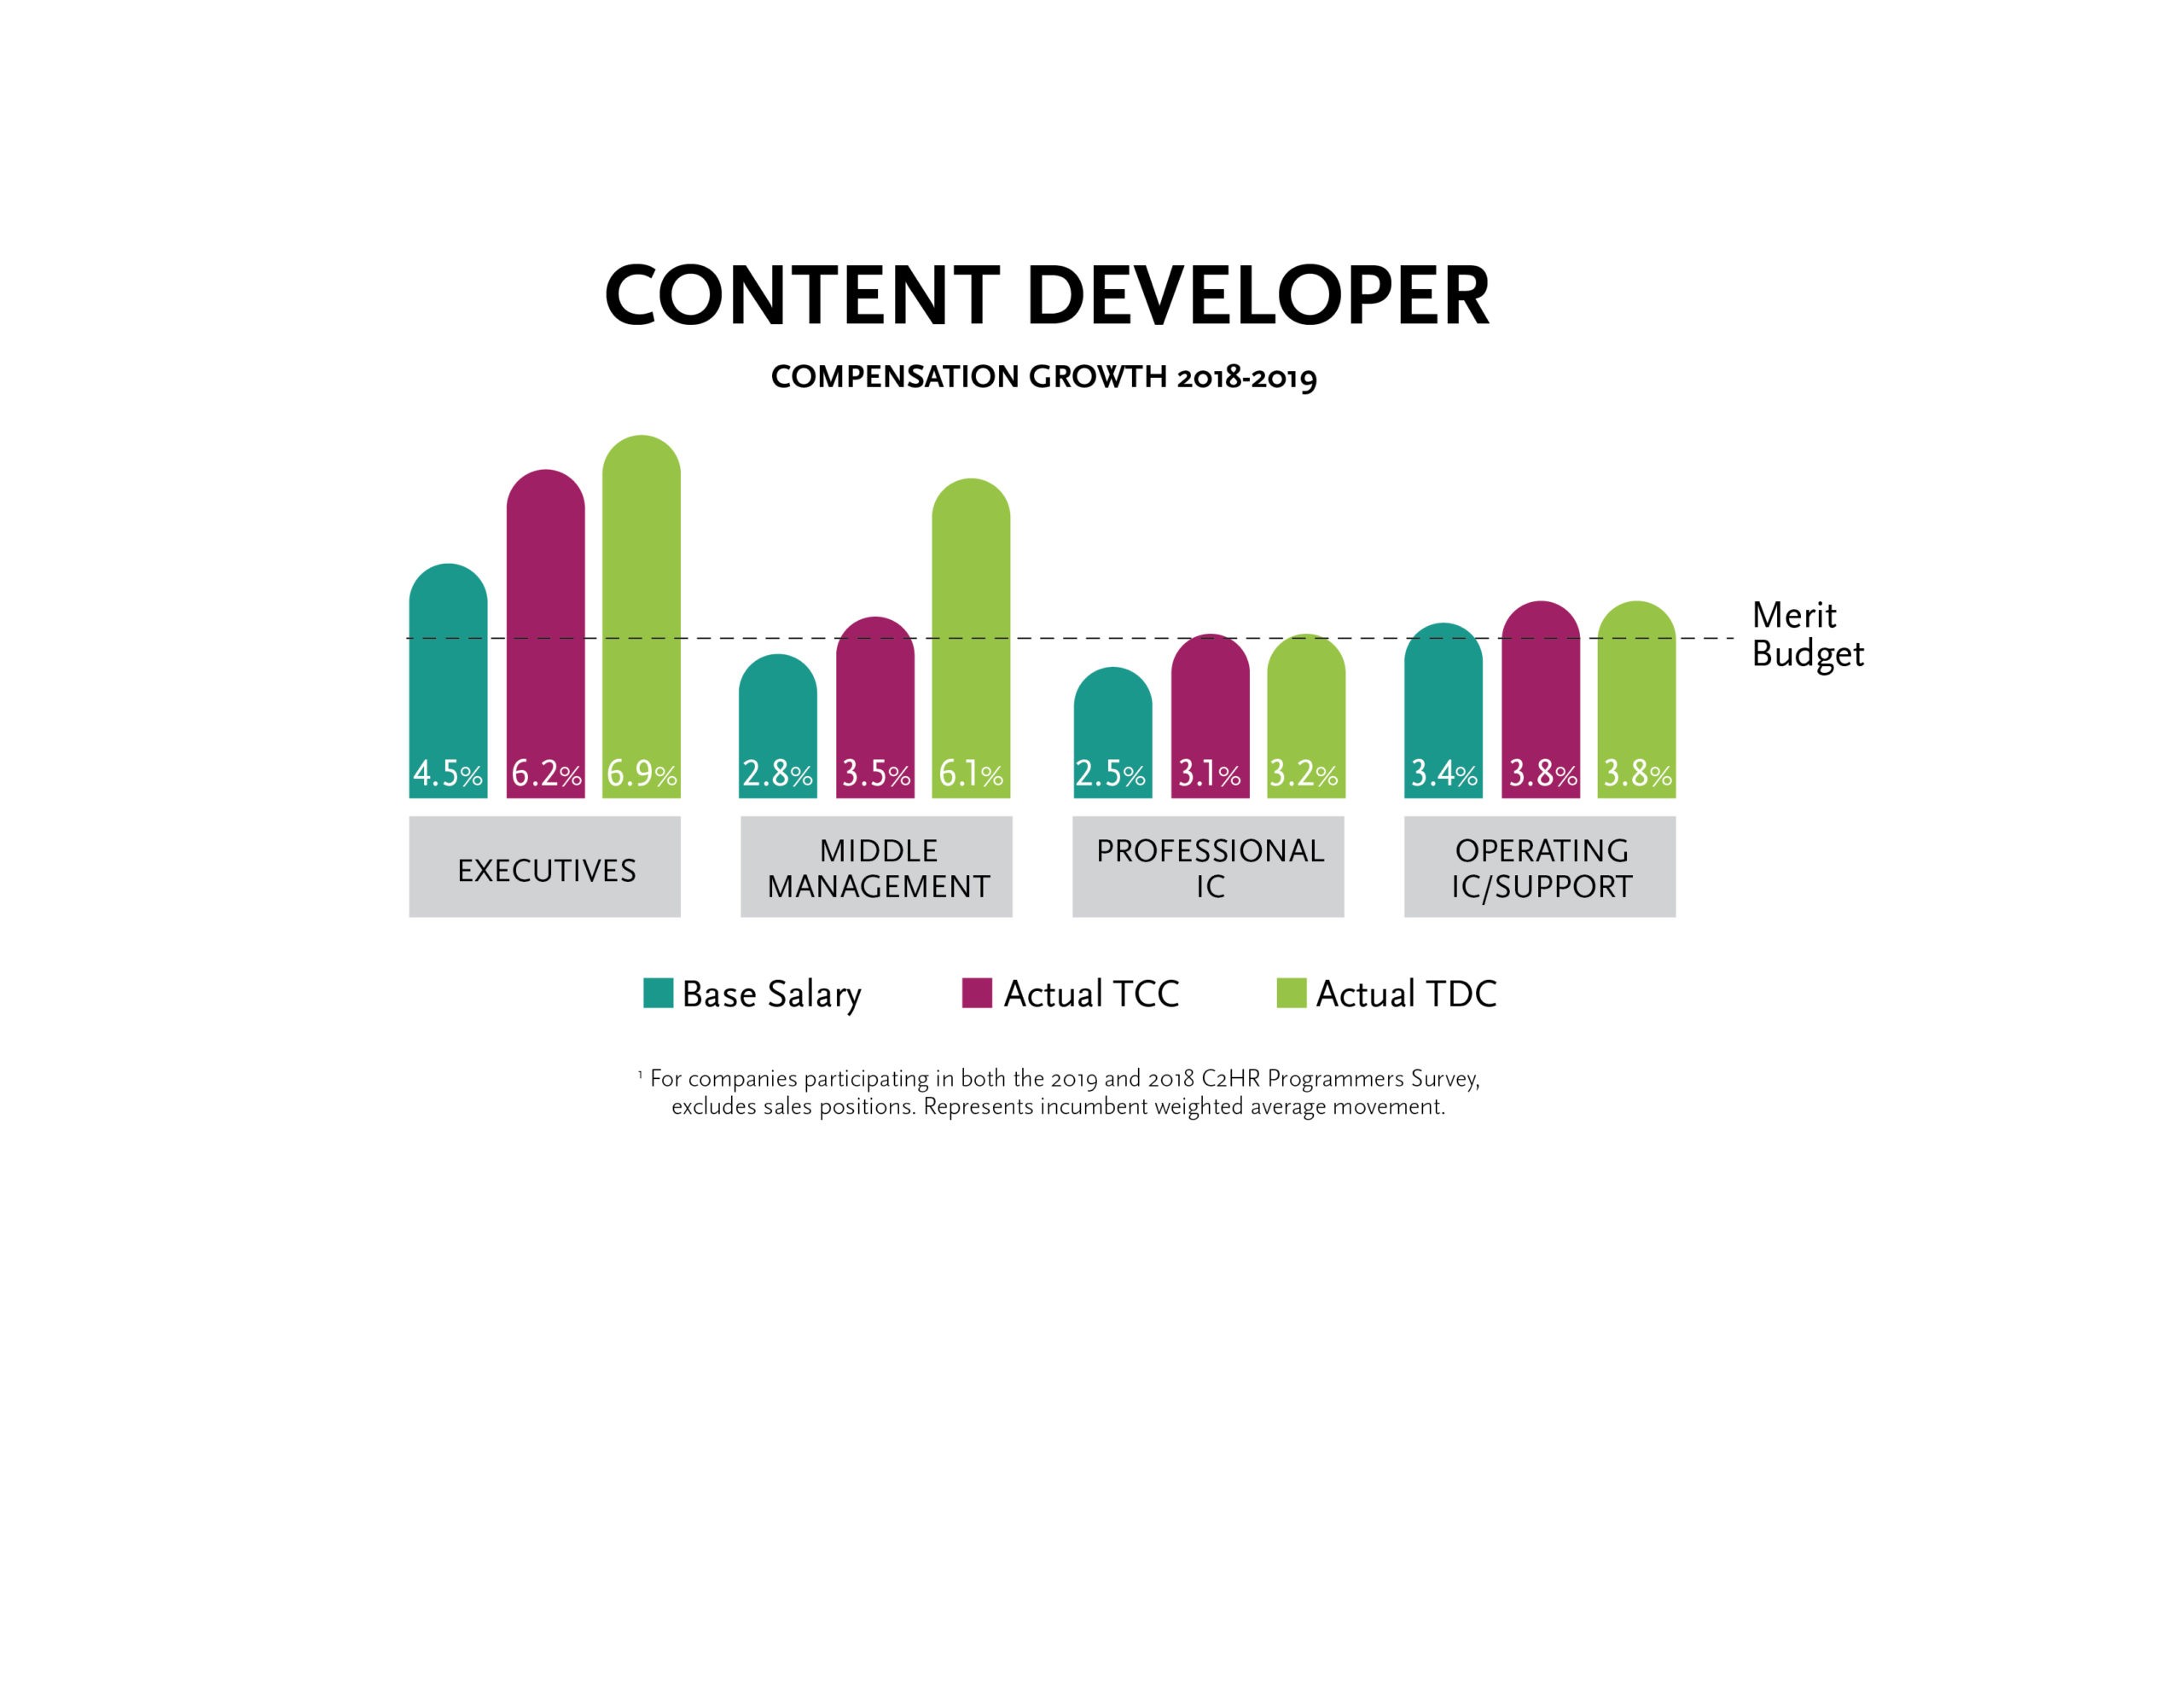 Content Developers